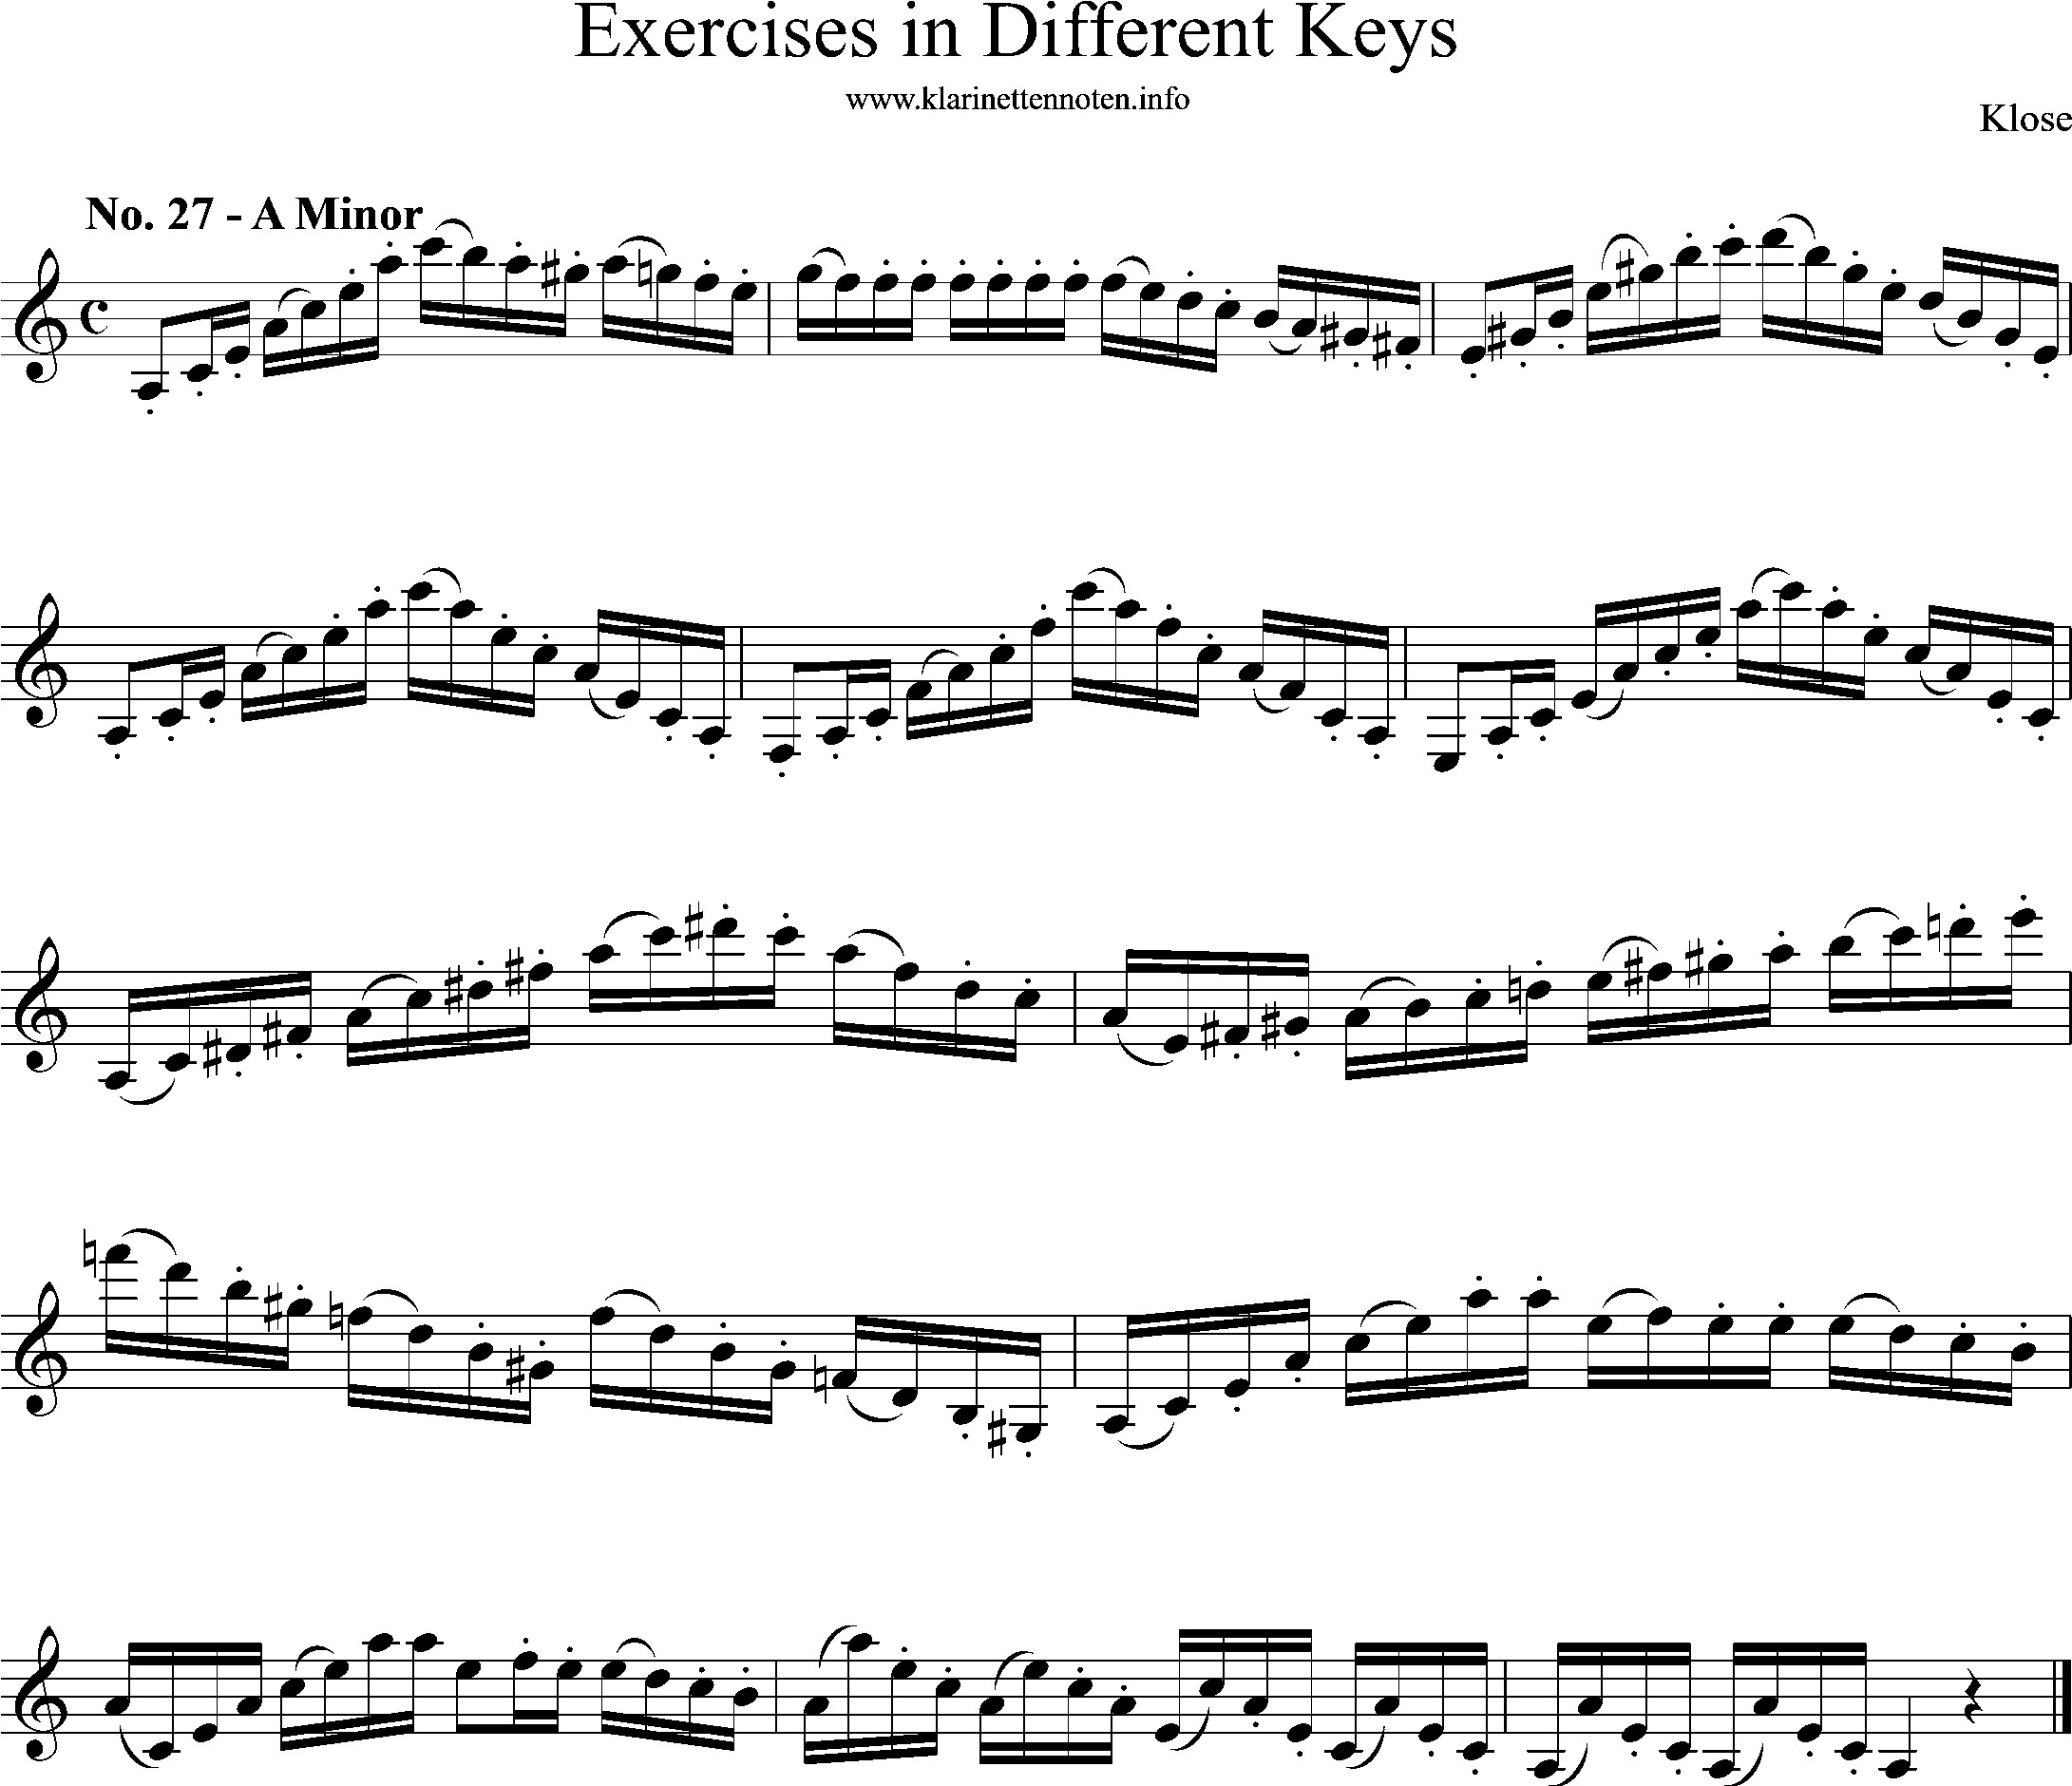 Exercises in Differewnt Keys, klose, No-27, a-minor